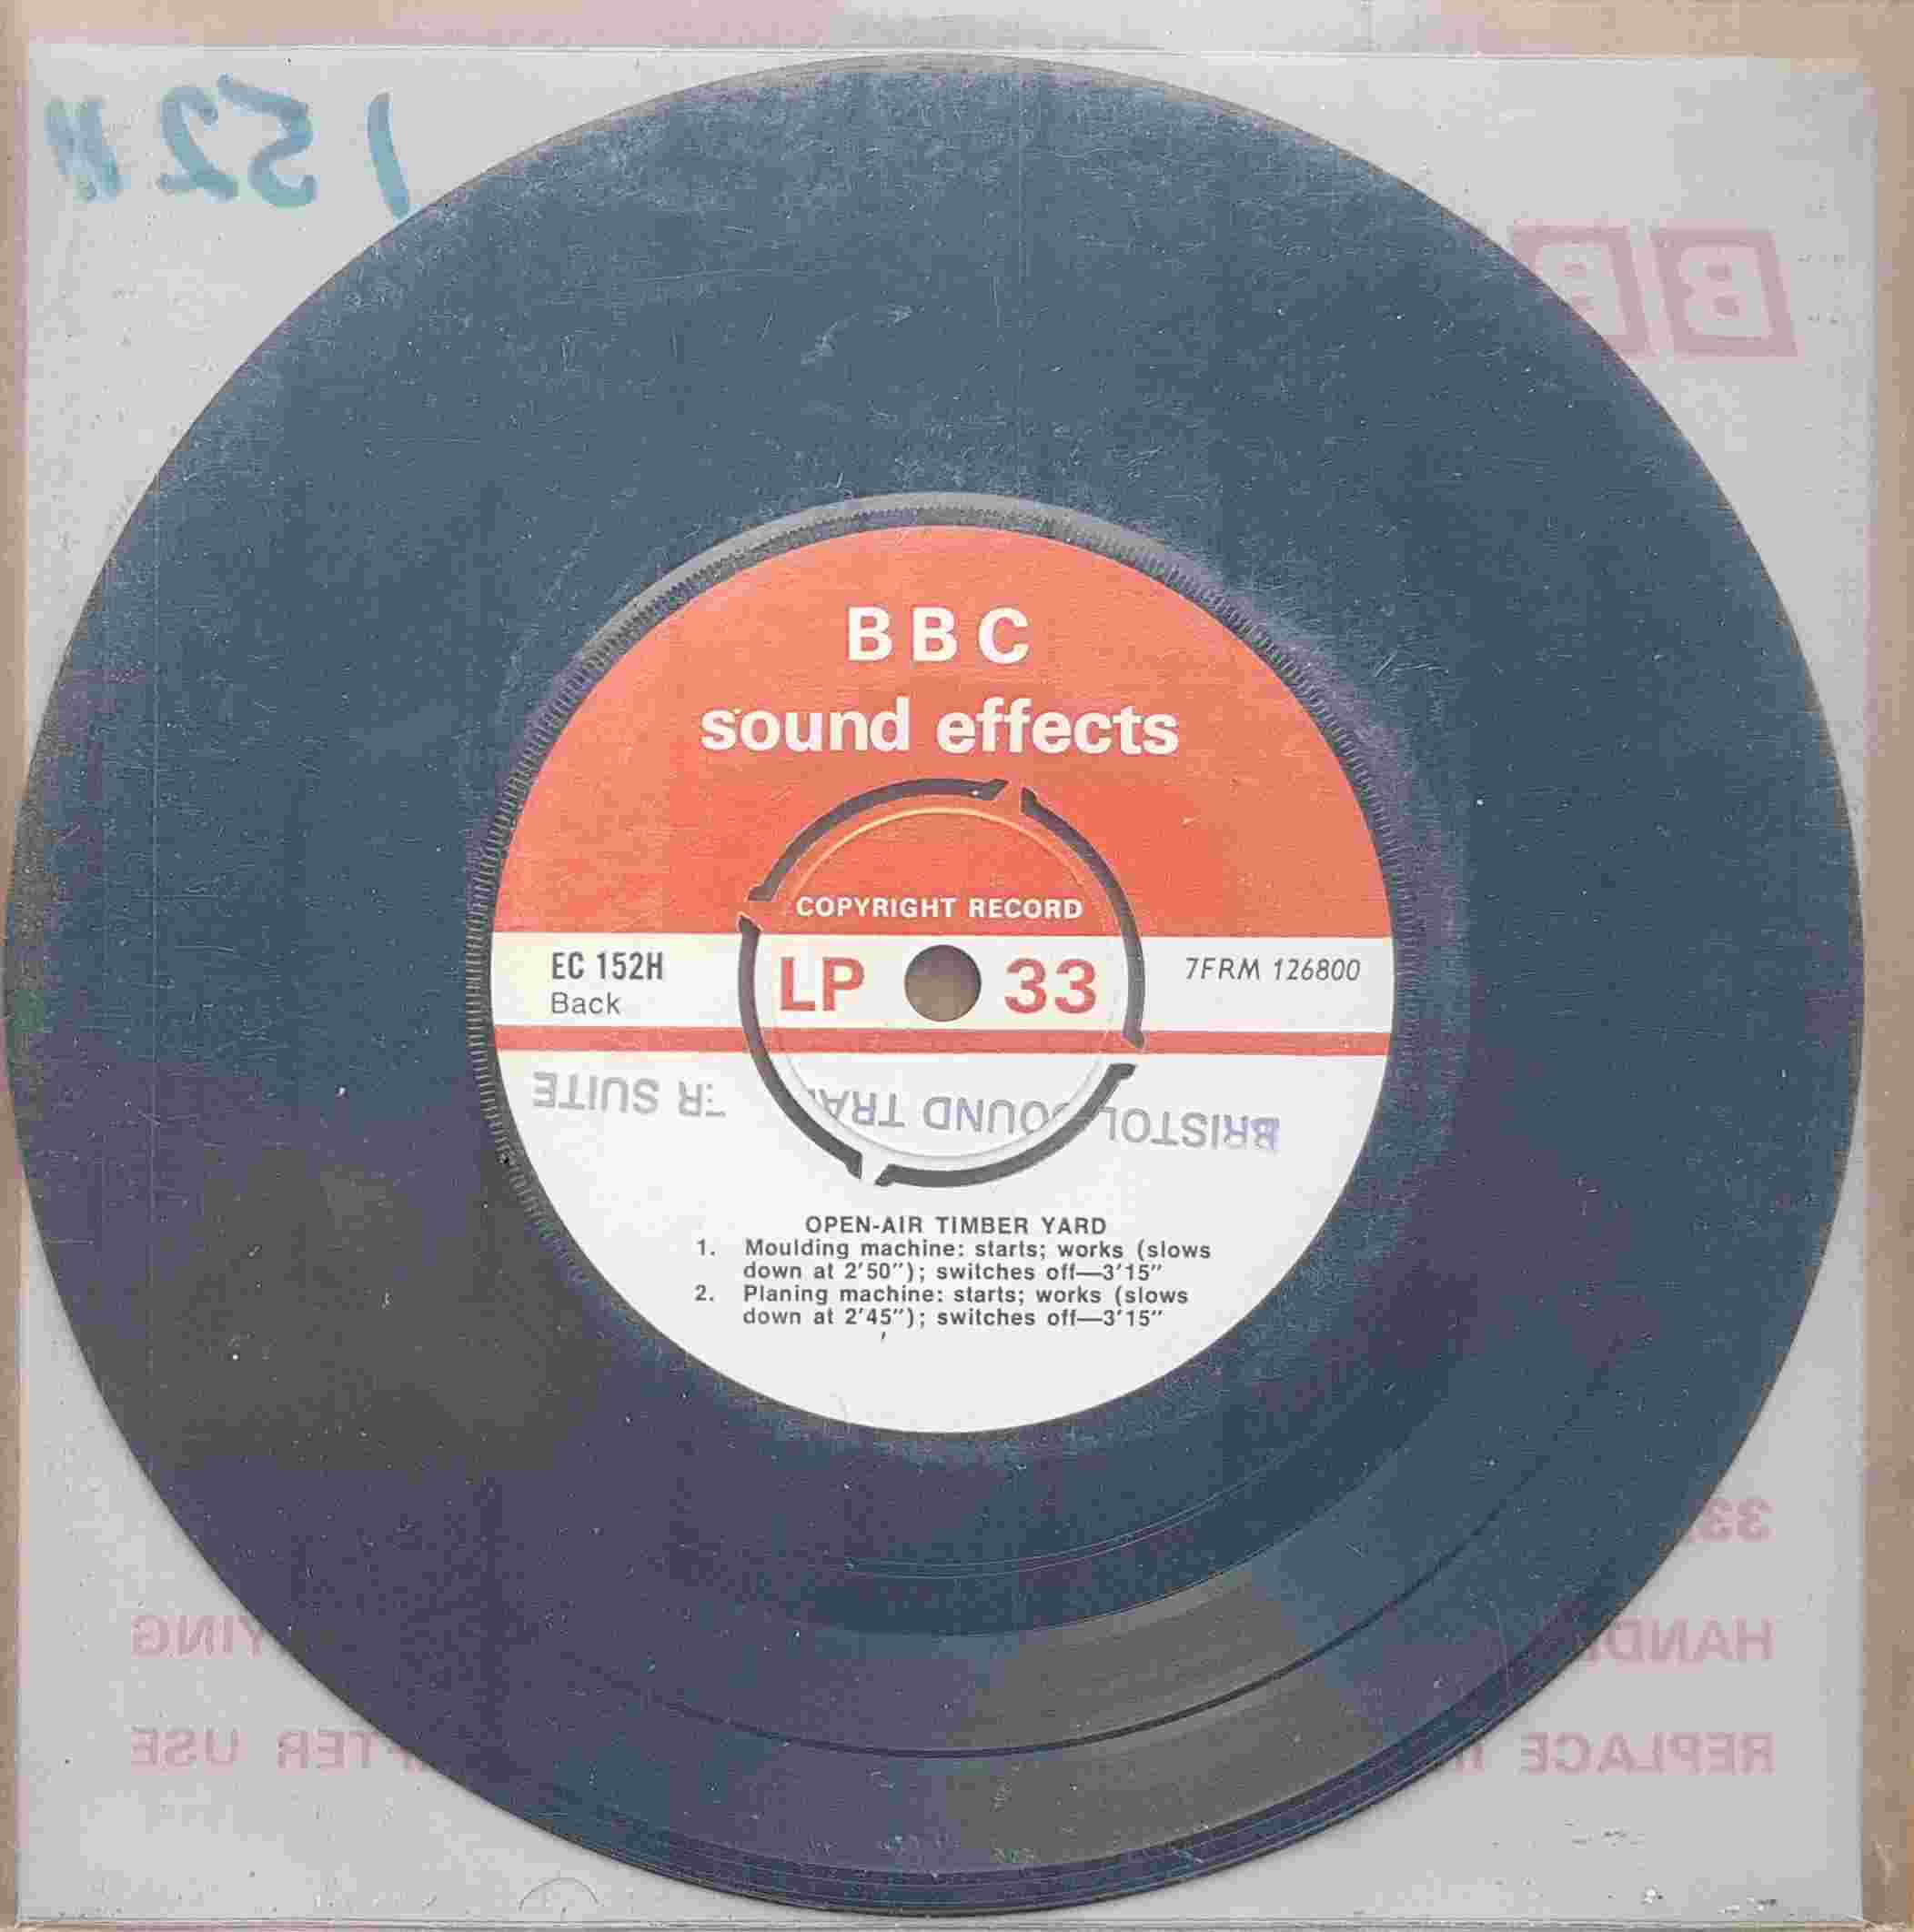 Picture of EC 152H Open-air timber yard by artist Not registered from the BBC records and Tapes library